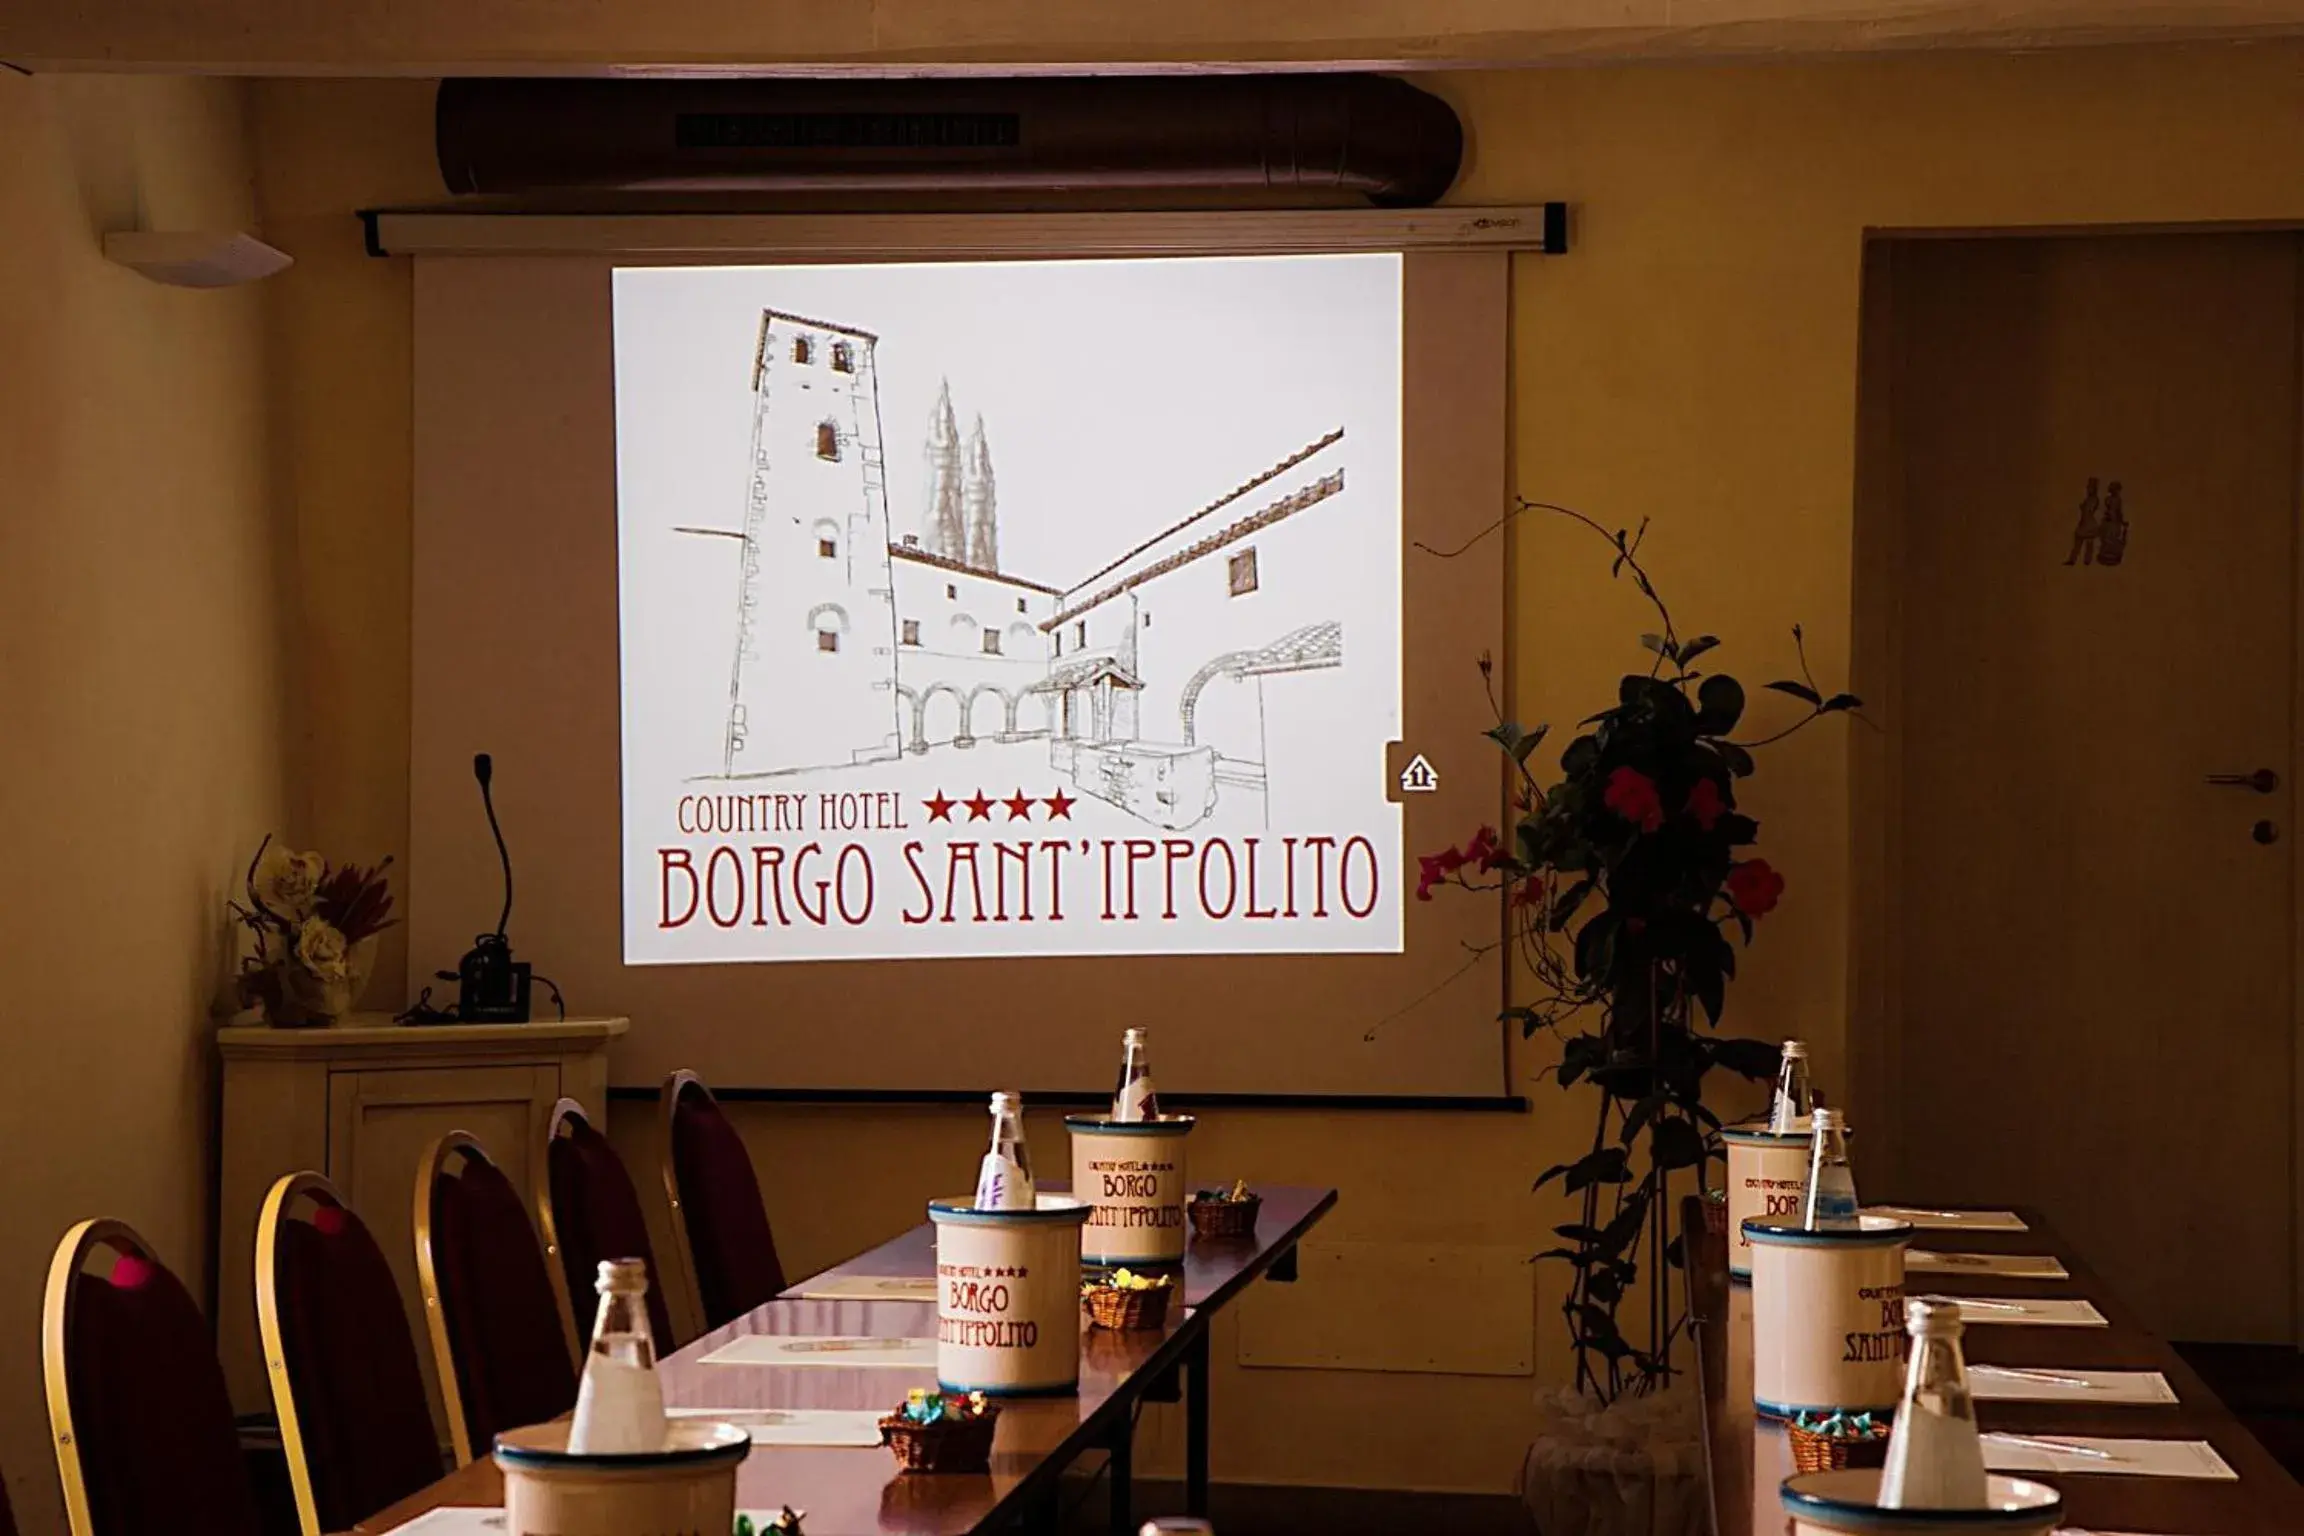 Meeting/conference room in Borgo Sant'ippolito Country Hotel